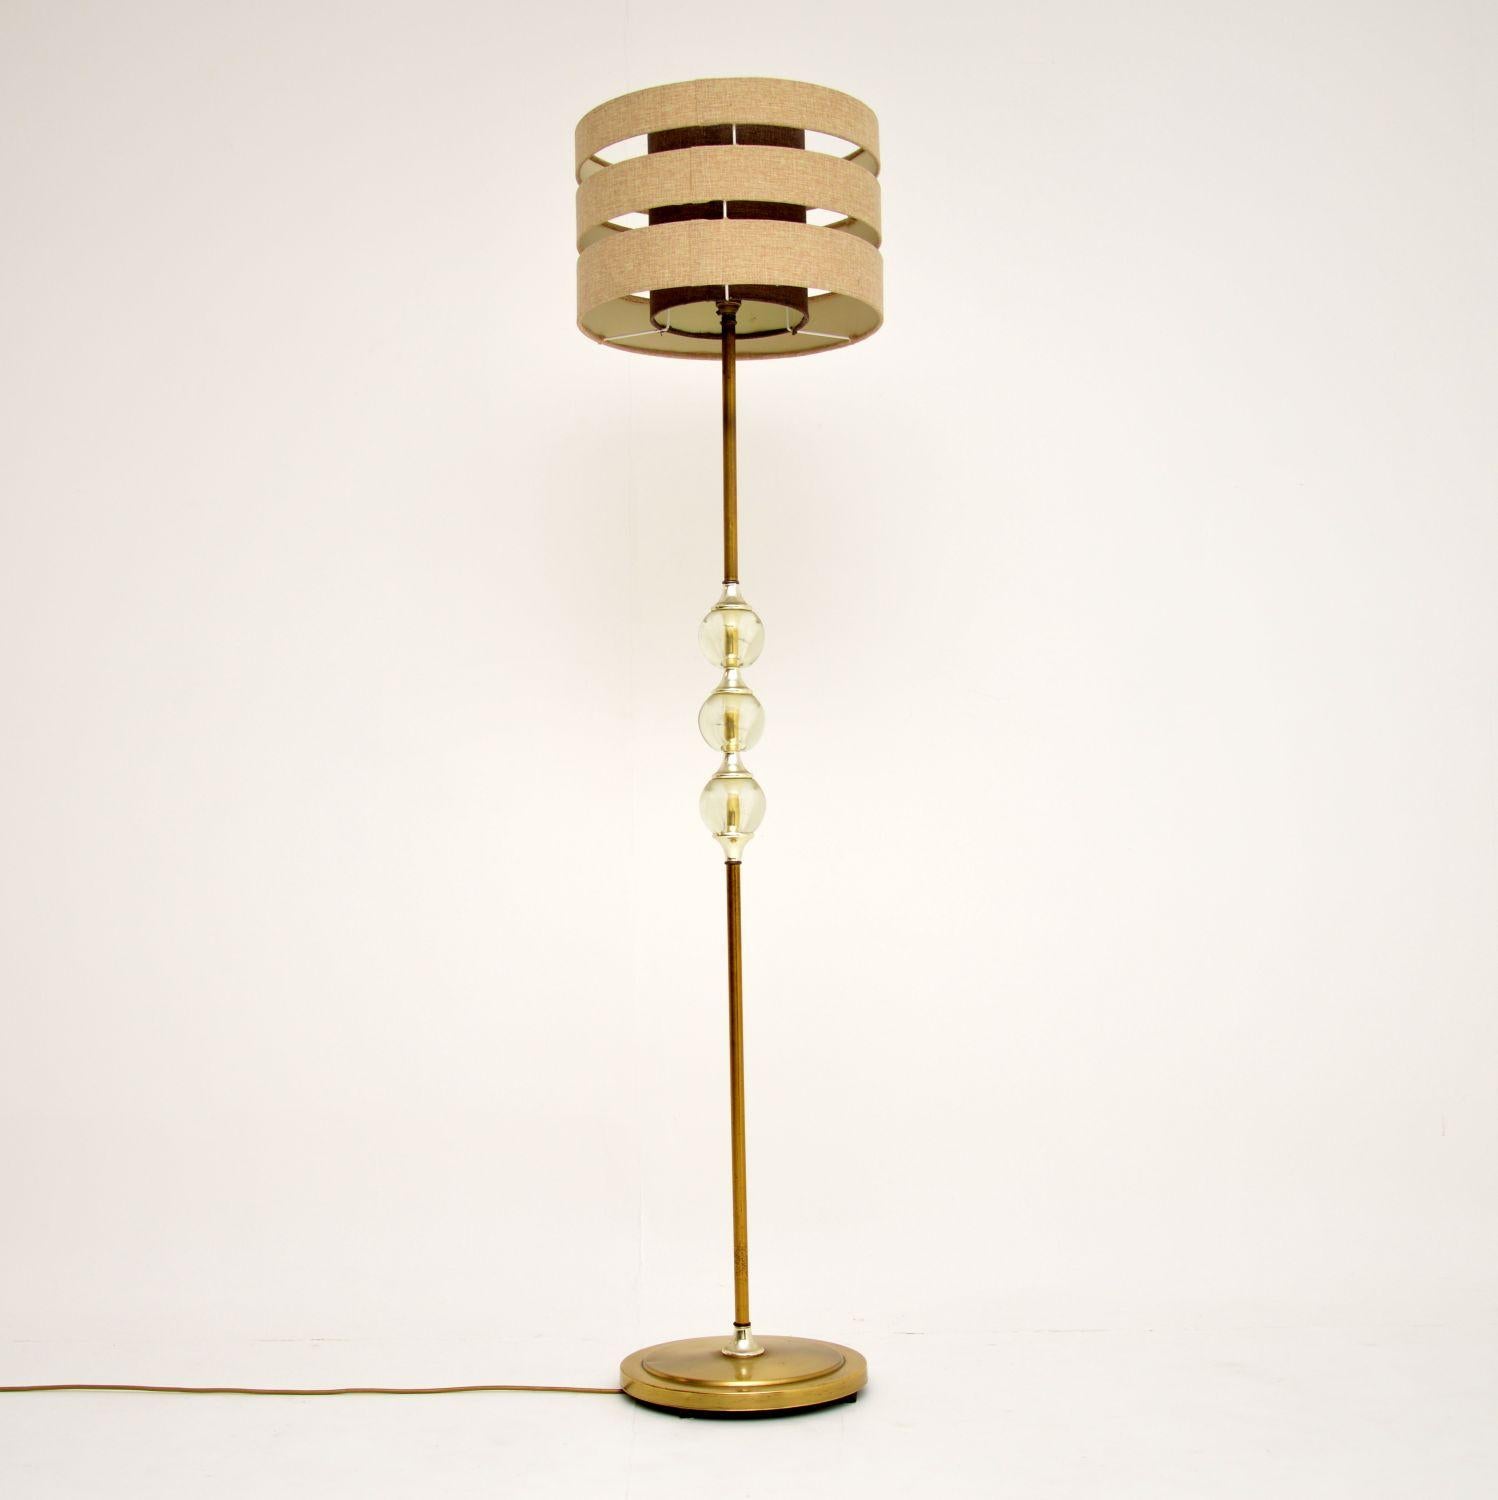 A stylish and very unusual vintage floor lamp, dating from the 1960’s. This has a brass stand with three interesting balls in the middle made from acrylic. This is in good vintage condition and in good working order, there is just some minor wear